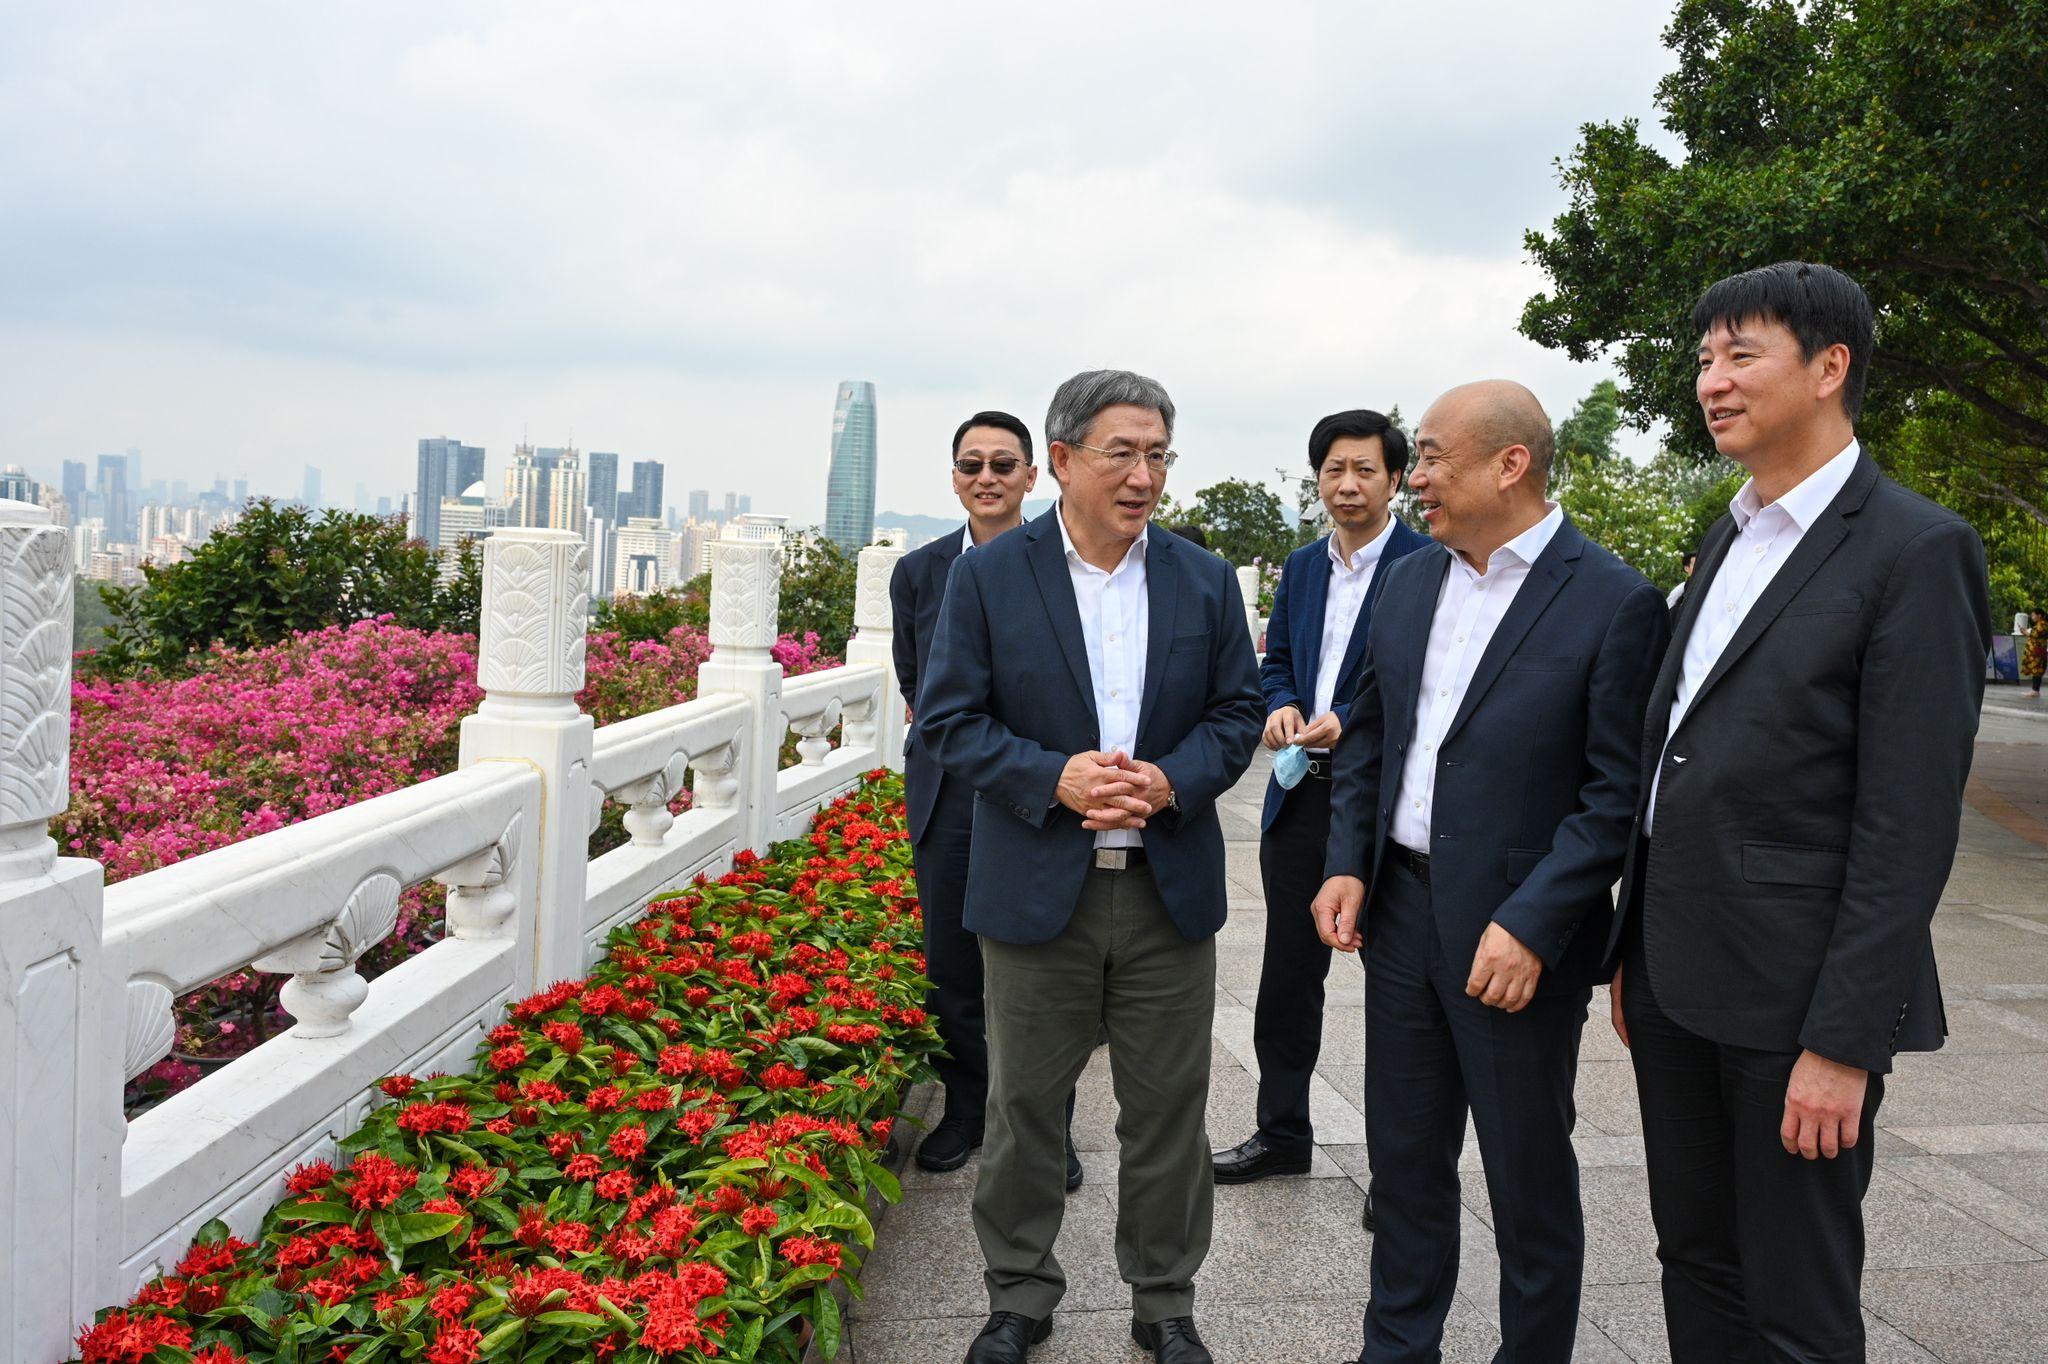 The Deputy Chief Secretary for Administration, Mr Cheuk Wing-hing (left), listens to a briefing by the Director-General of the Urban Administration and Law Enforcement Bureau of Shenzhen Municipality, Mr Zhang Guohong (centre), on landscape greening measures at Lianhuashan Park in Shenzhen today (March 23). Looking on is the Director of Highways, Mr Jimmy Chan (right).